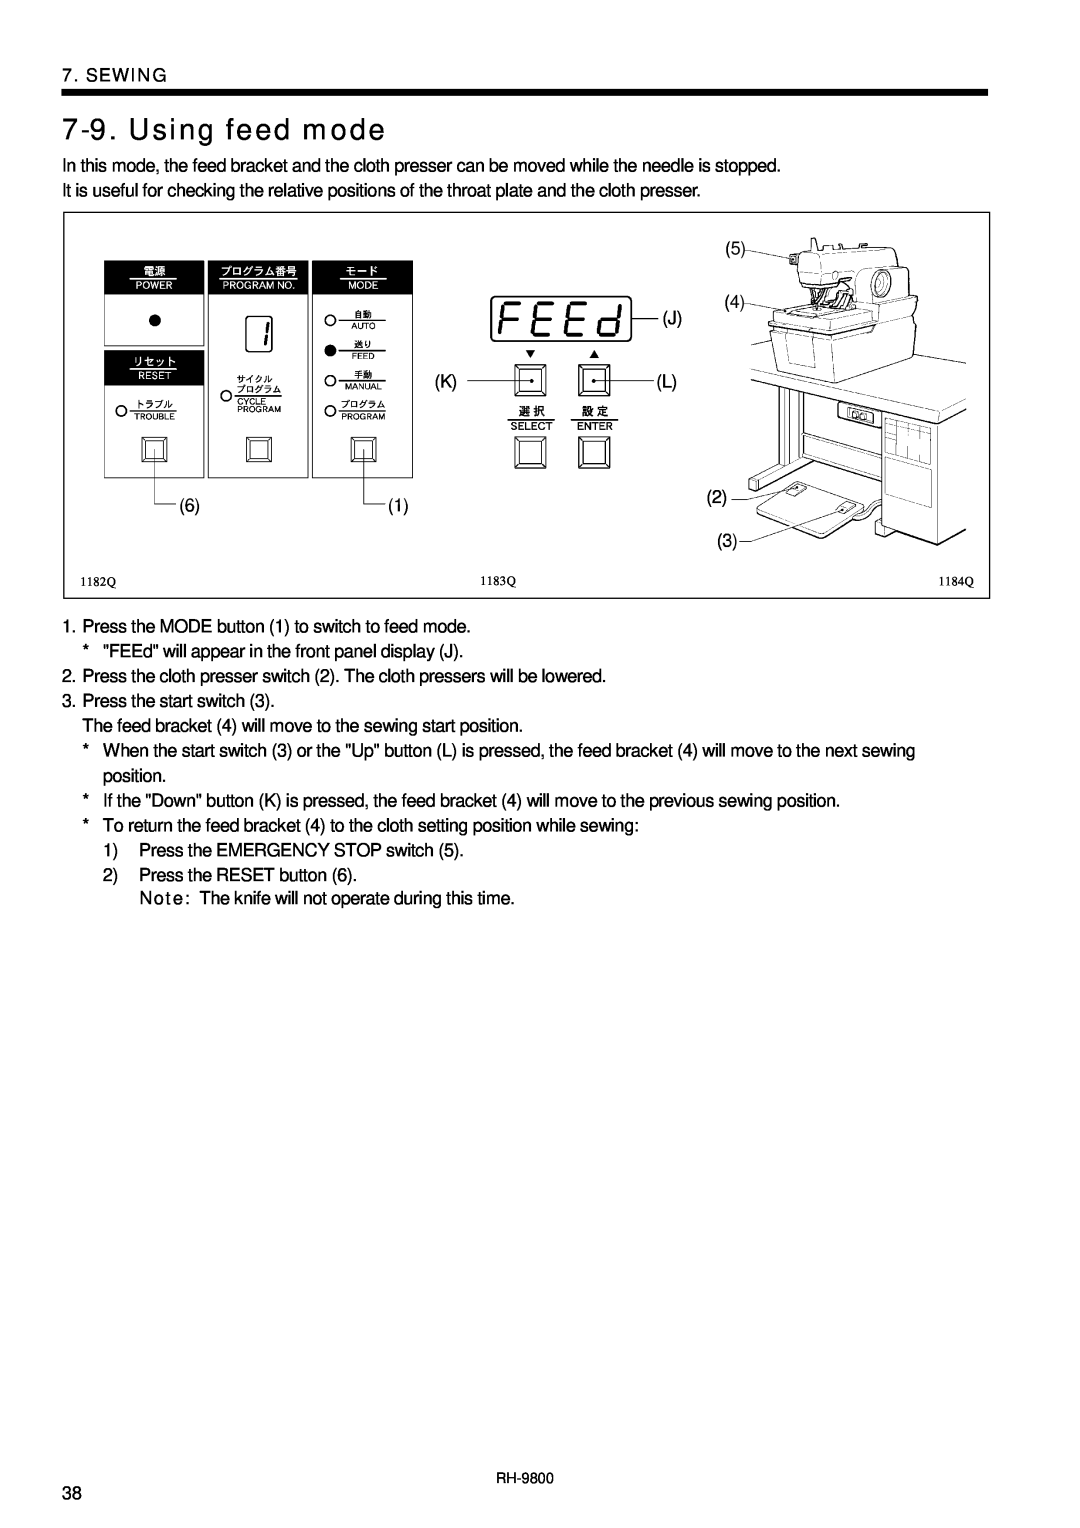 Brother DH4-B980 instruction manual Using feed mode, Sewing 